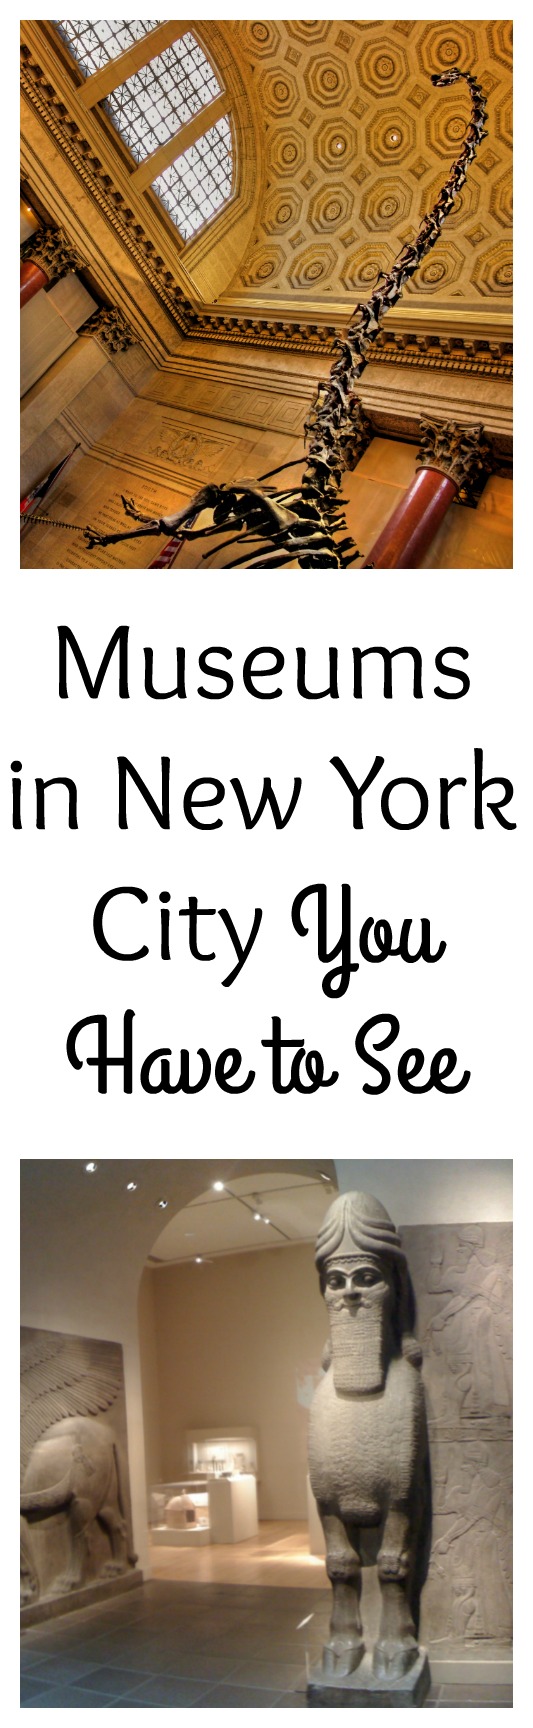 Heading to New York City? Among other things, New York City is known for its museums. There are a lot of museums in New York City.